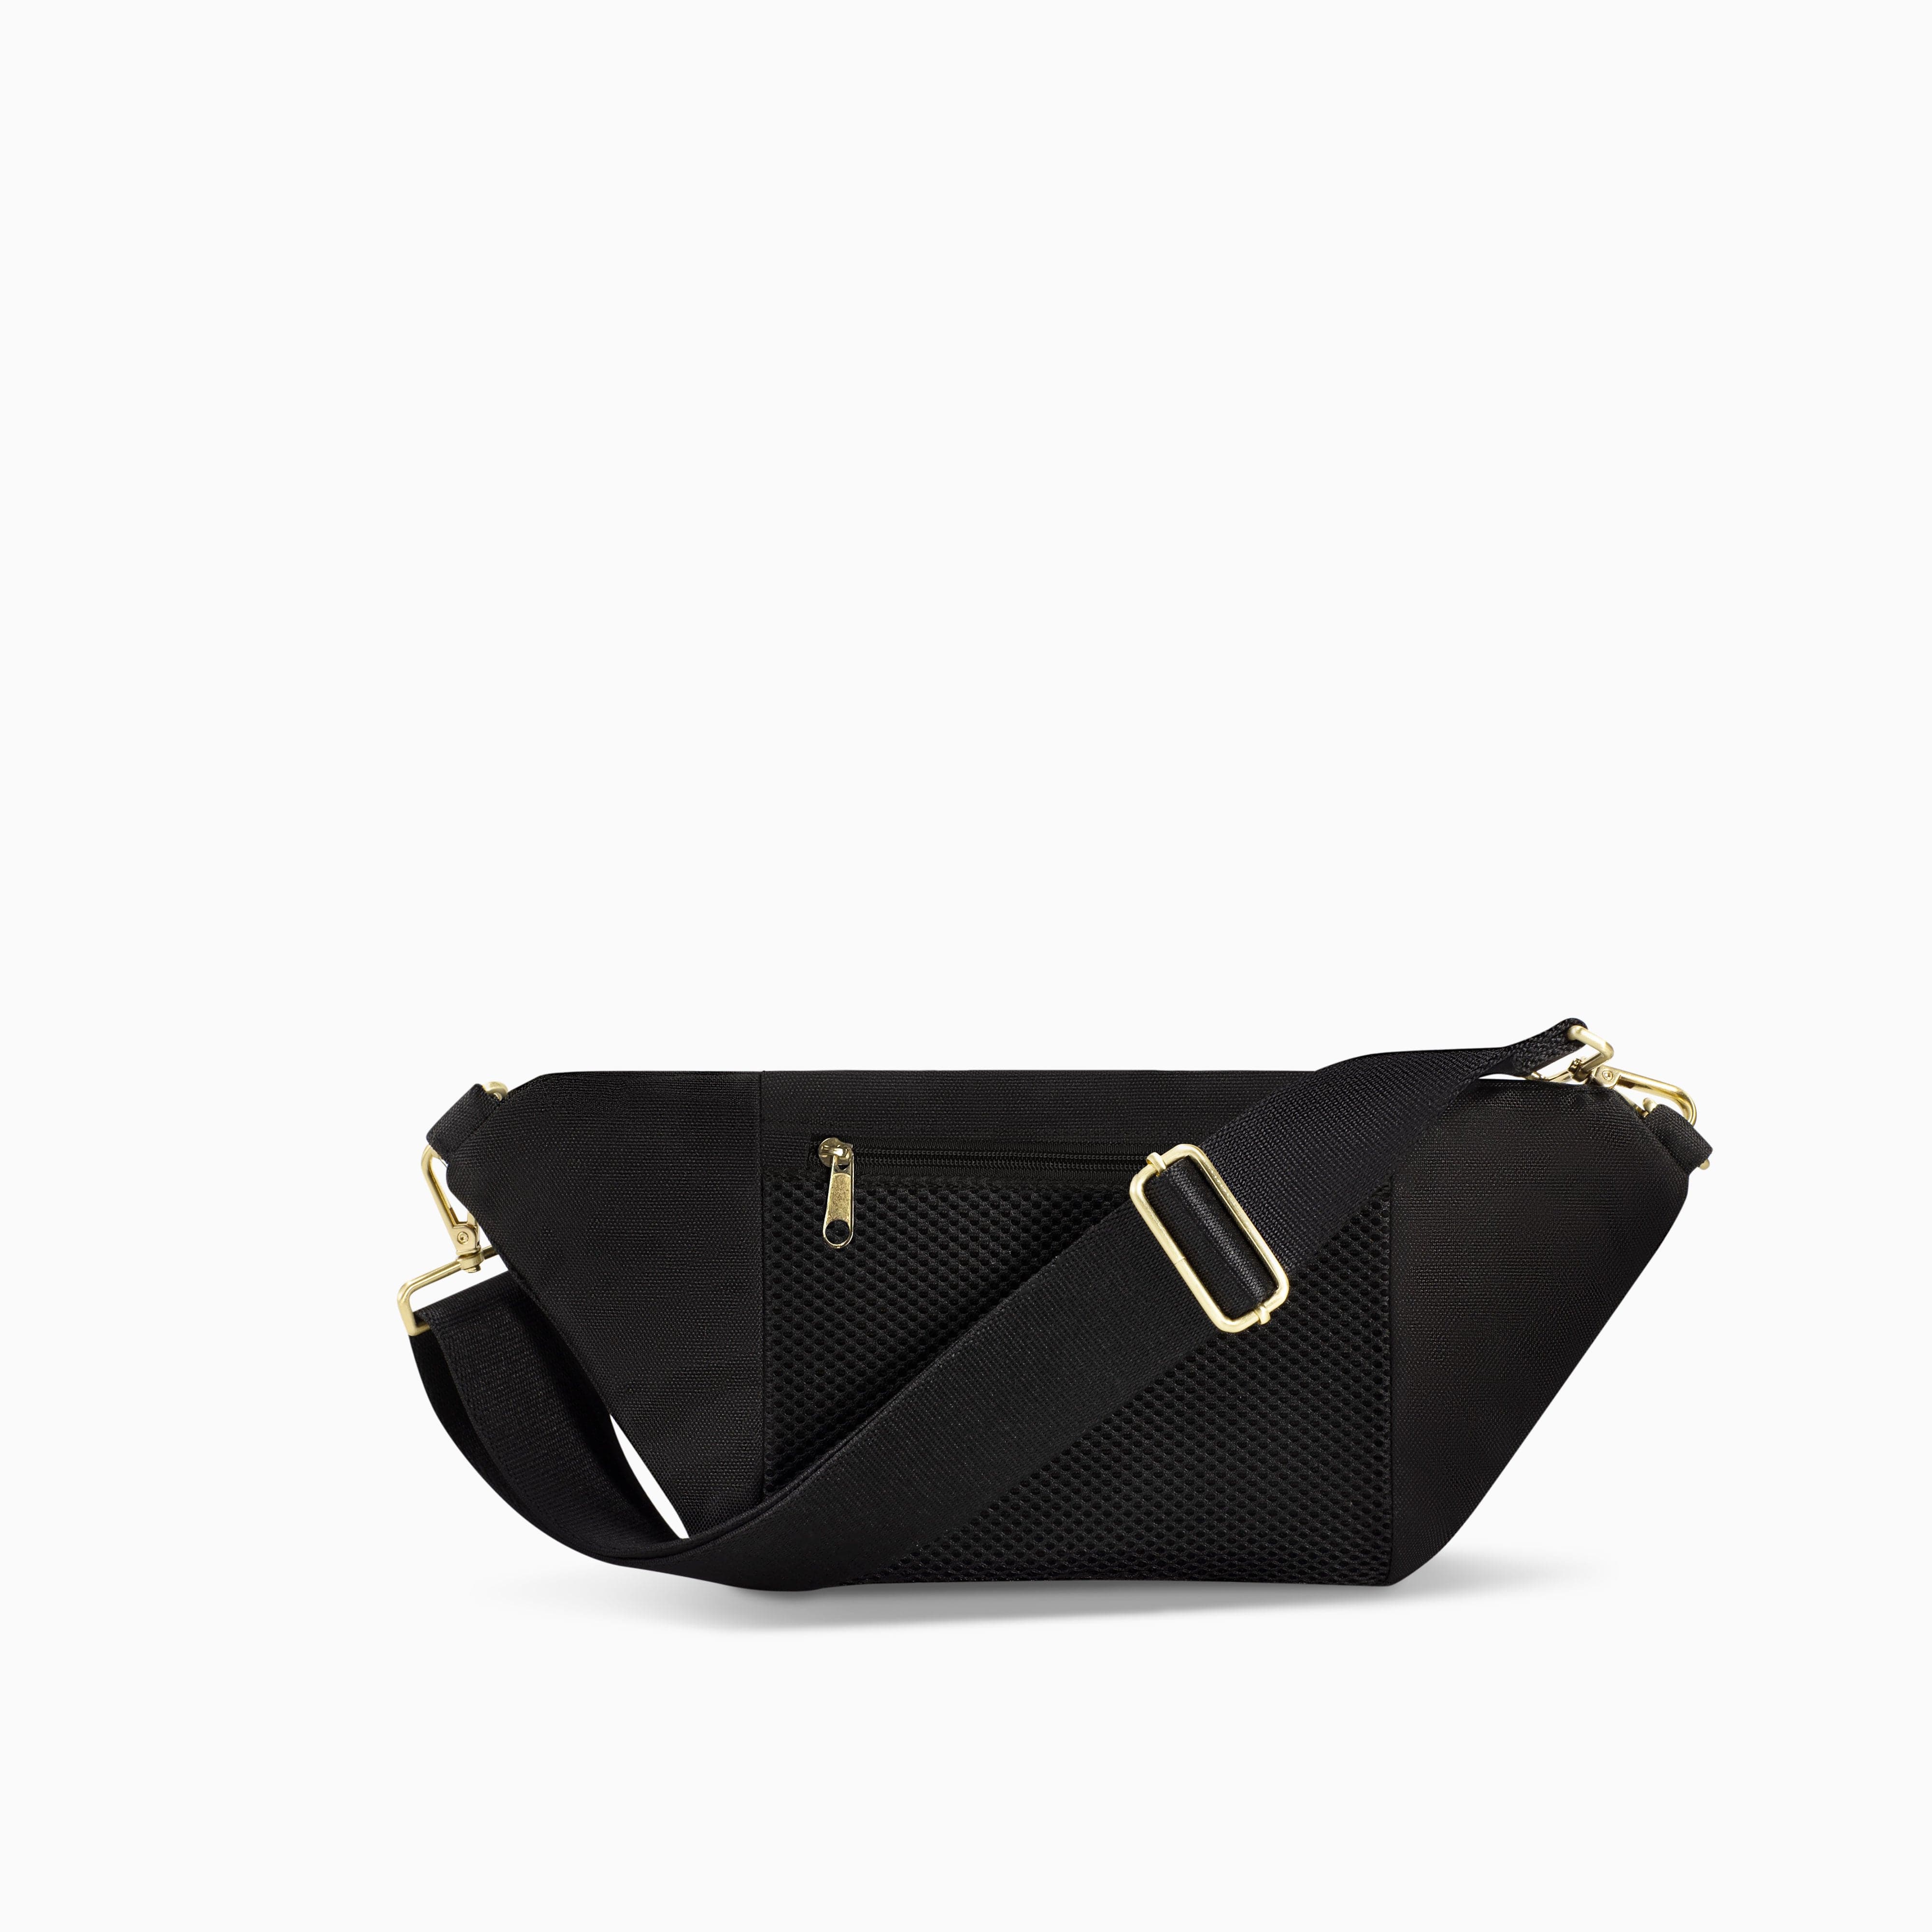 Black leather fanny pack and crossbody bag – CASUPO